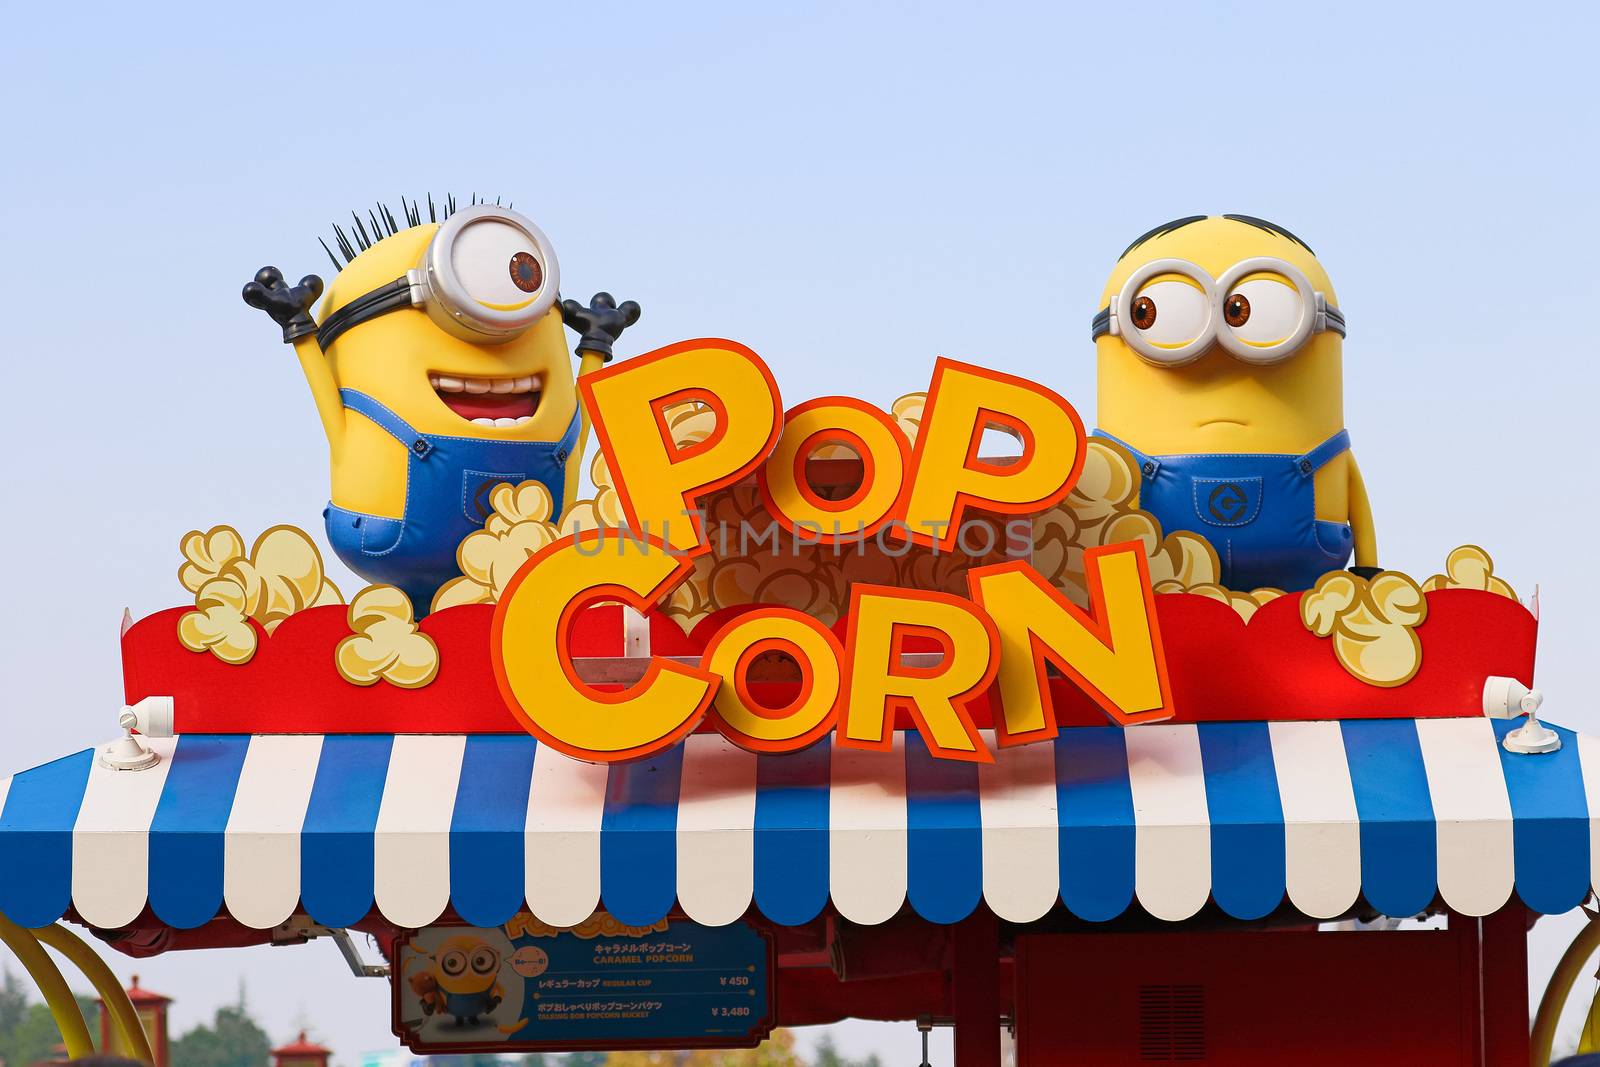 OSAKA, JAPAN - APR 21, 2017 : Photo of "HAPPY MINION POP CORN SHOP", selling Minion Pop Corn, located in Universal Studios, Osaka, Japan. Minions are famous character from Despicable Me animation.